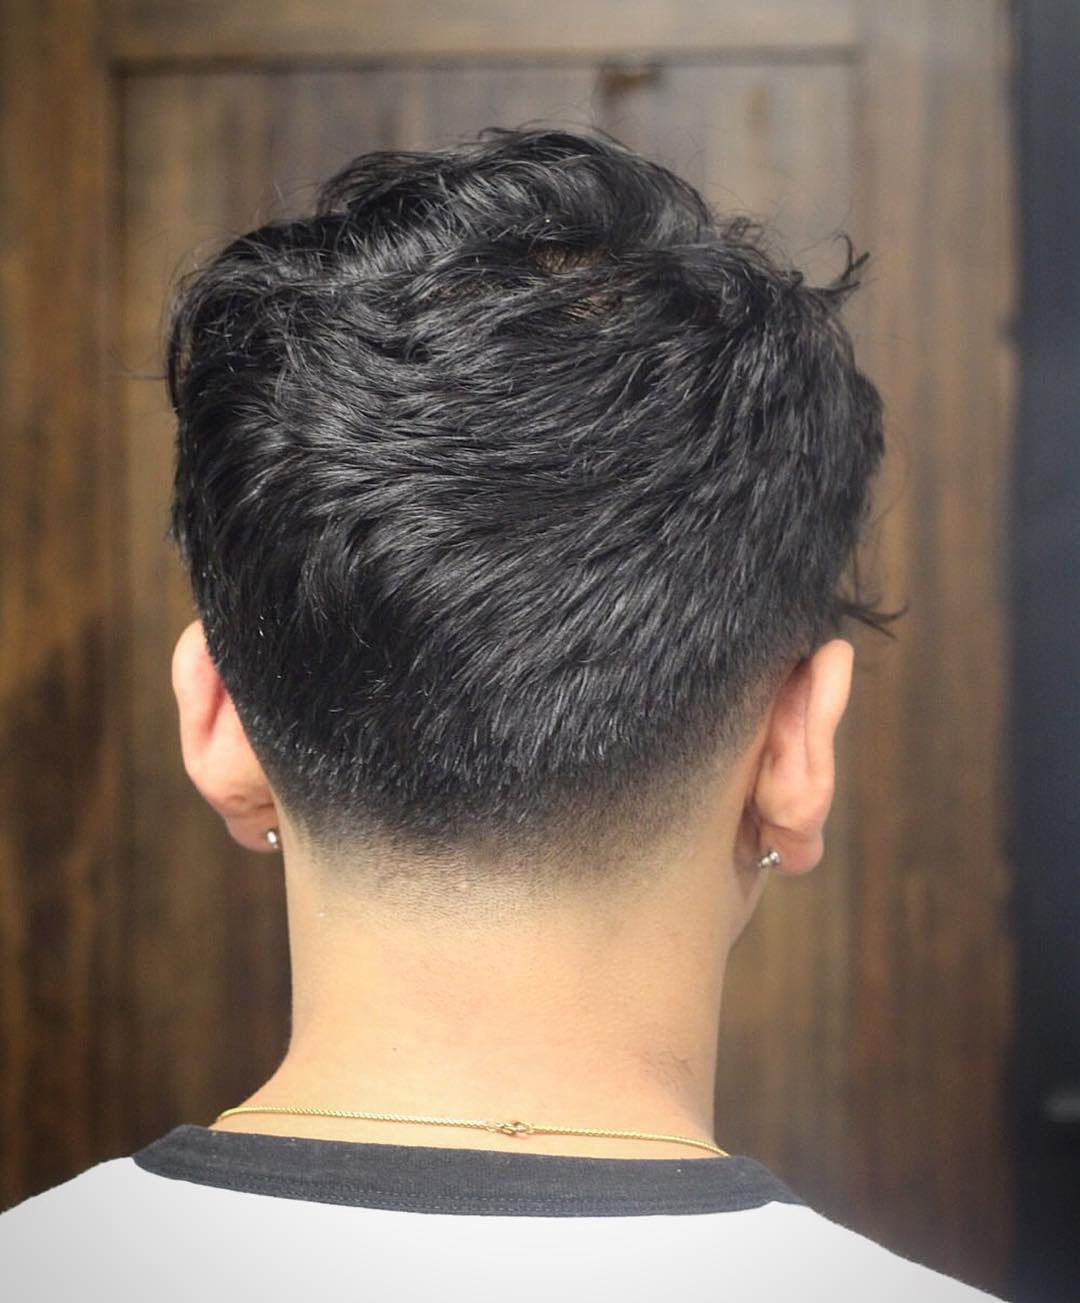 Taper haircut for thick hair